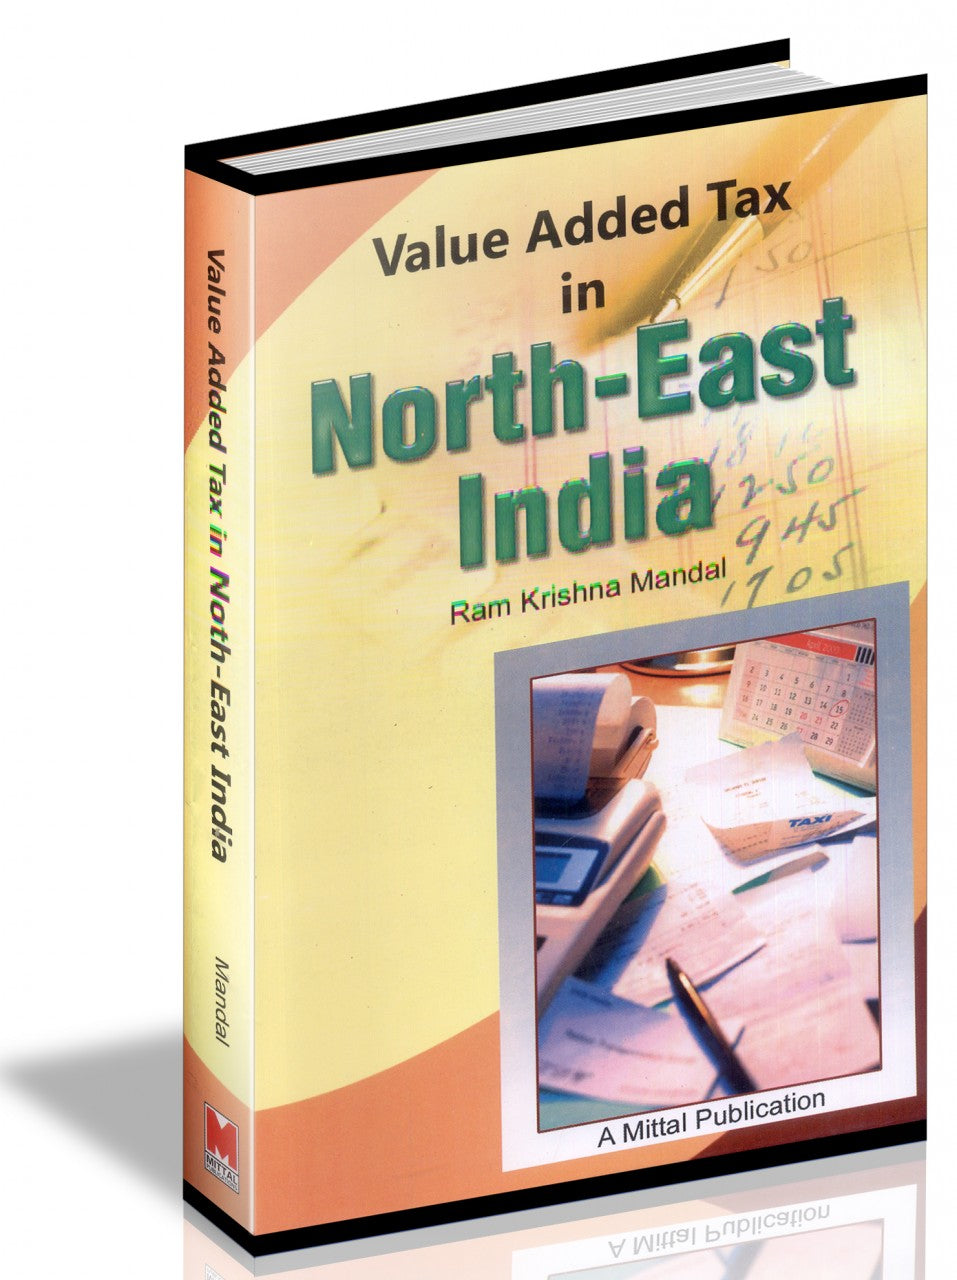 Value Added Tax in North-East India